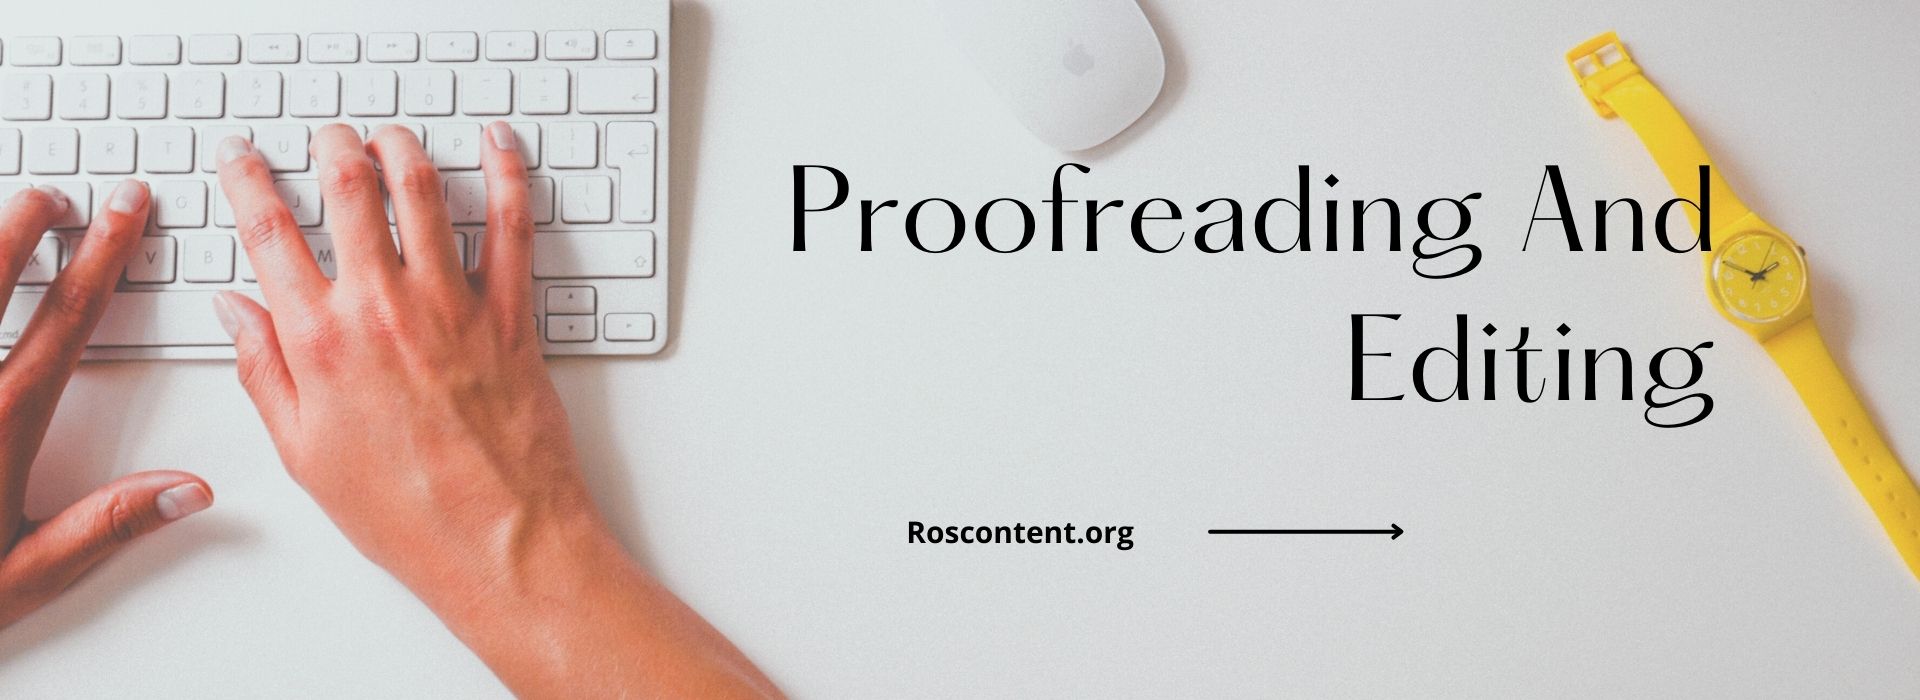 proofreading and editing